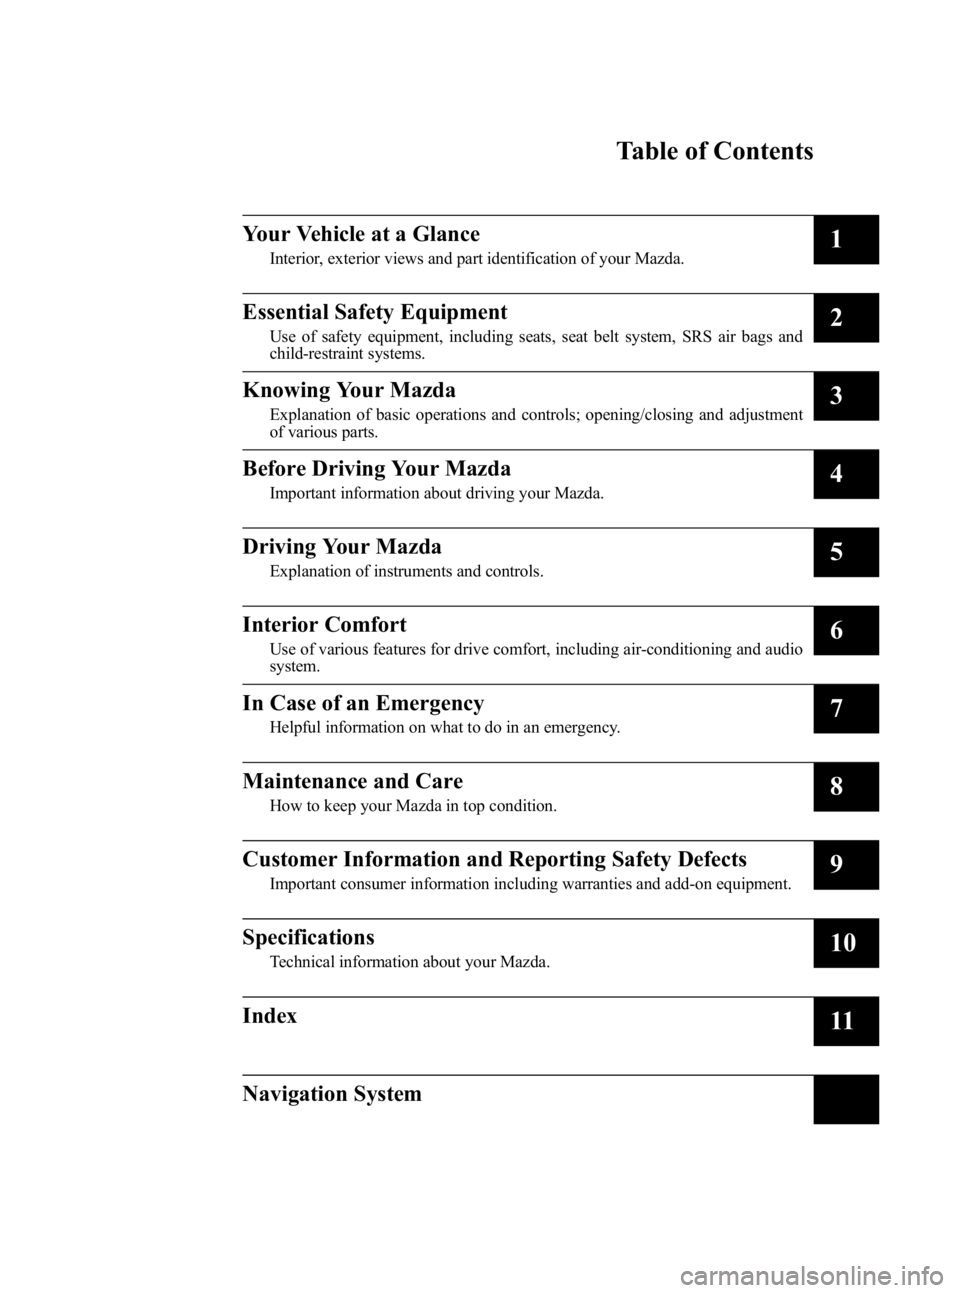 MAZDA MODEL 3 5-DOOR 2005  Owners Manual Black plate (5,1)
Mazda3_8T96-EA-04J_Edition3 Page5
Wednesday, May 11 2005 3:36 PM
Form No.8T96-EA-04J
Table of Contents
Your Vehicle at a Glance
Interior, exterior views and part identification of yo